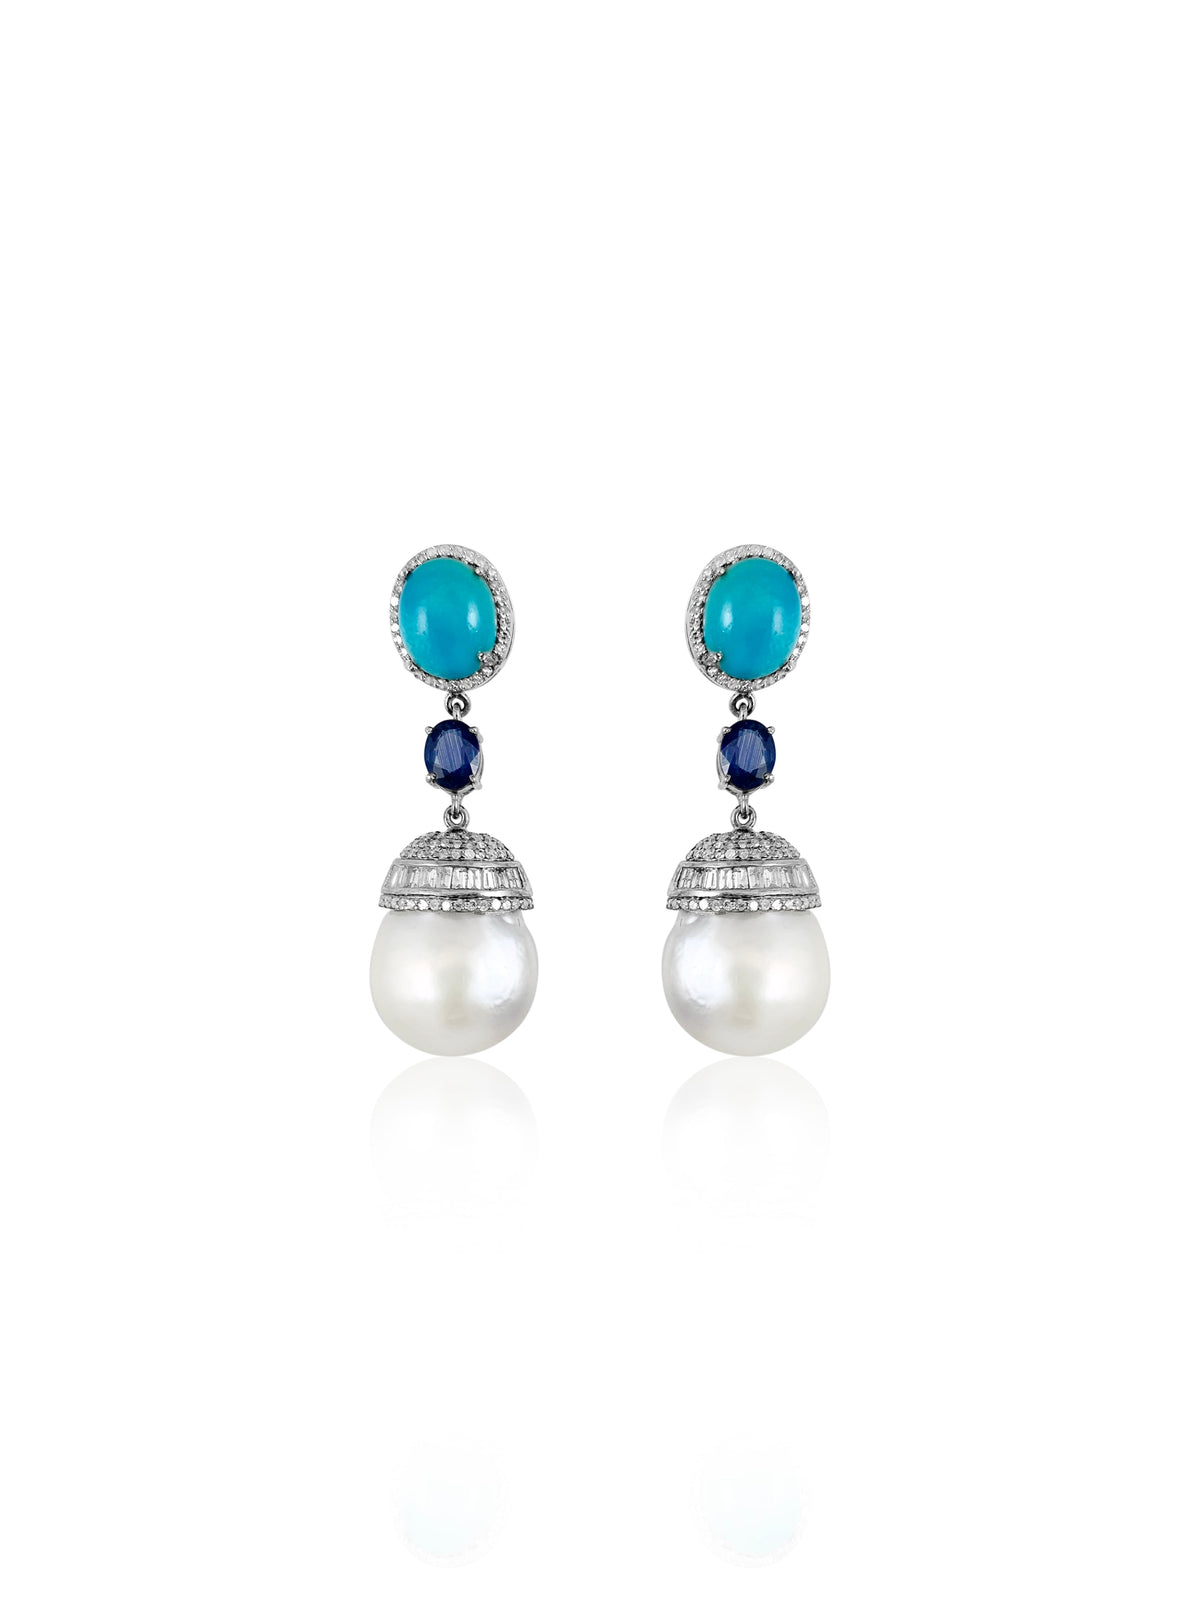 This pair of earrings are perfect for special occasions, this design gives the piece a feminine touch.  Diamond Turquoise Kyanite Pearl Barroque Silver with Rhodium Plated  Gold Post